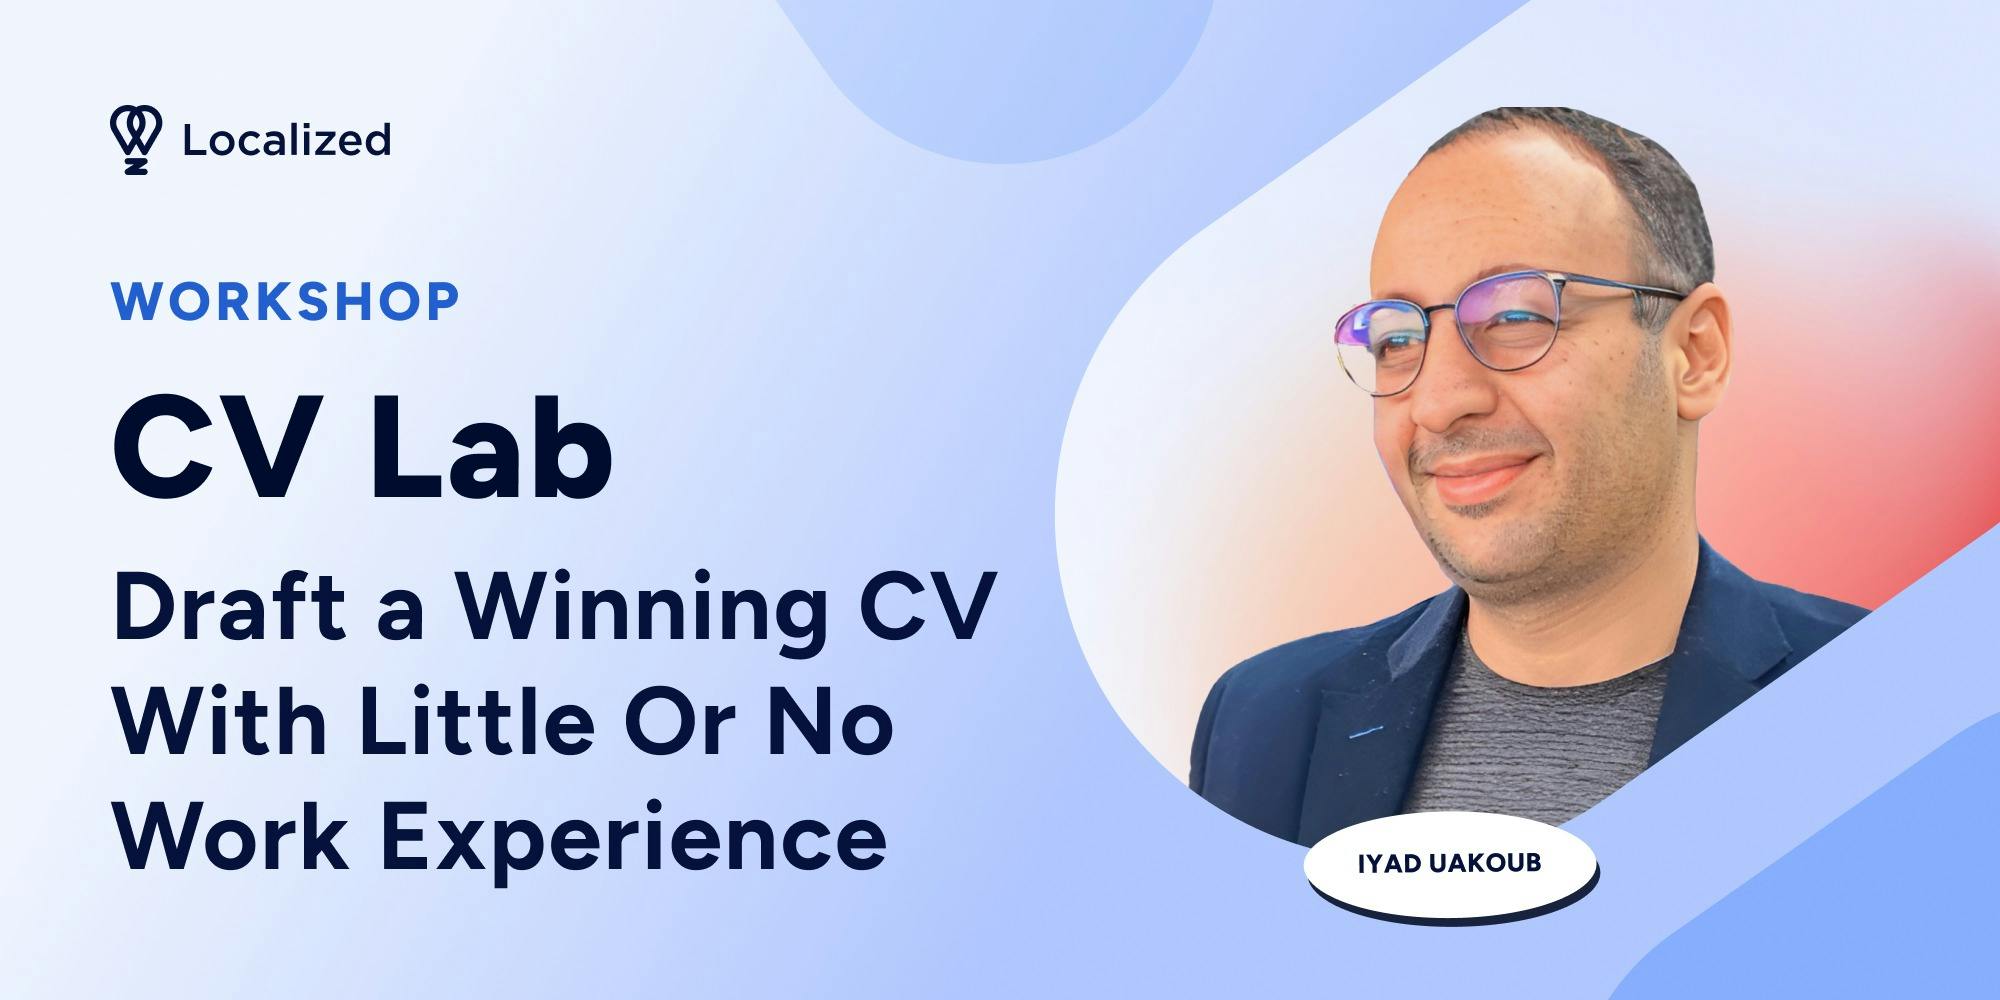 Workshop: CV Lab - Draft a Winning CV With Little Or No Work Experience